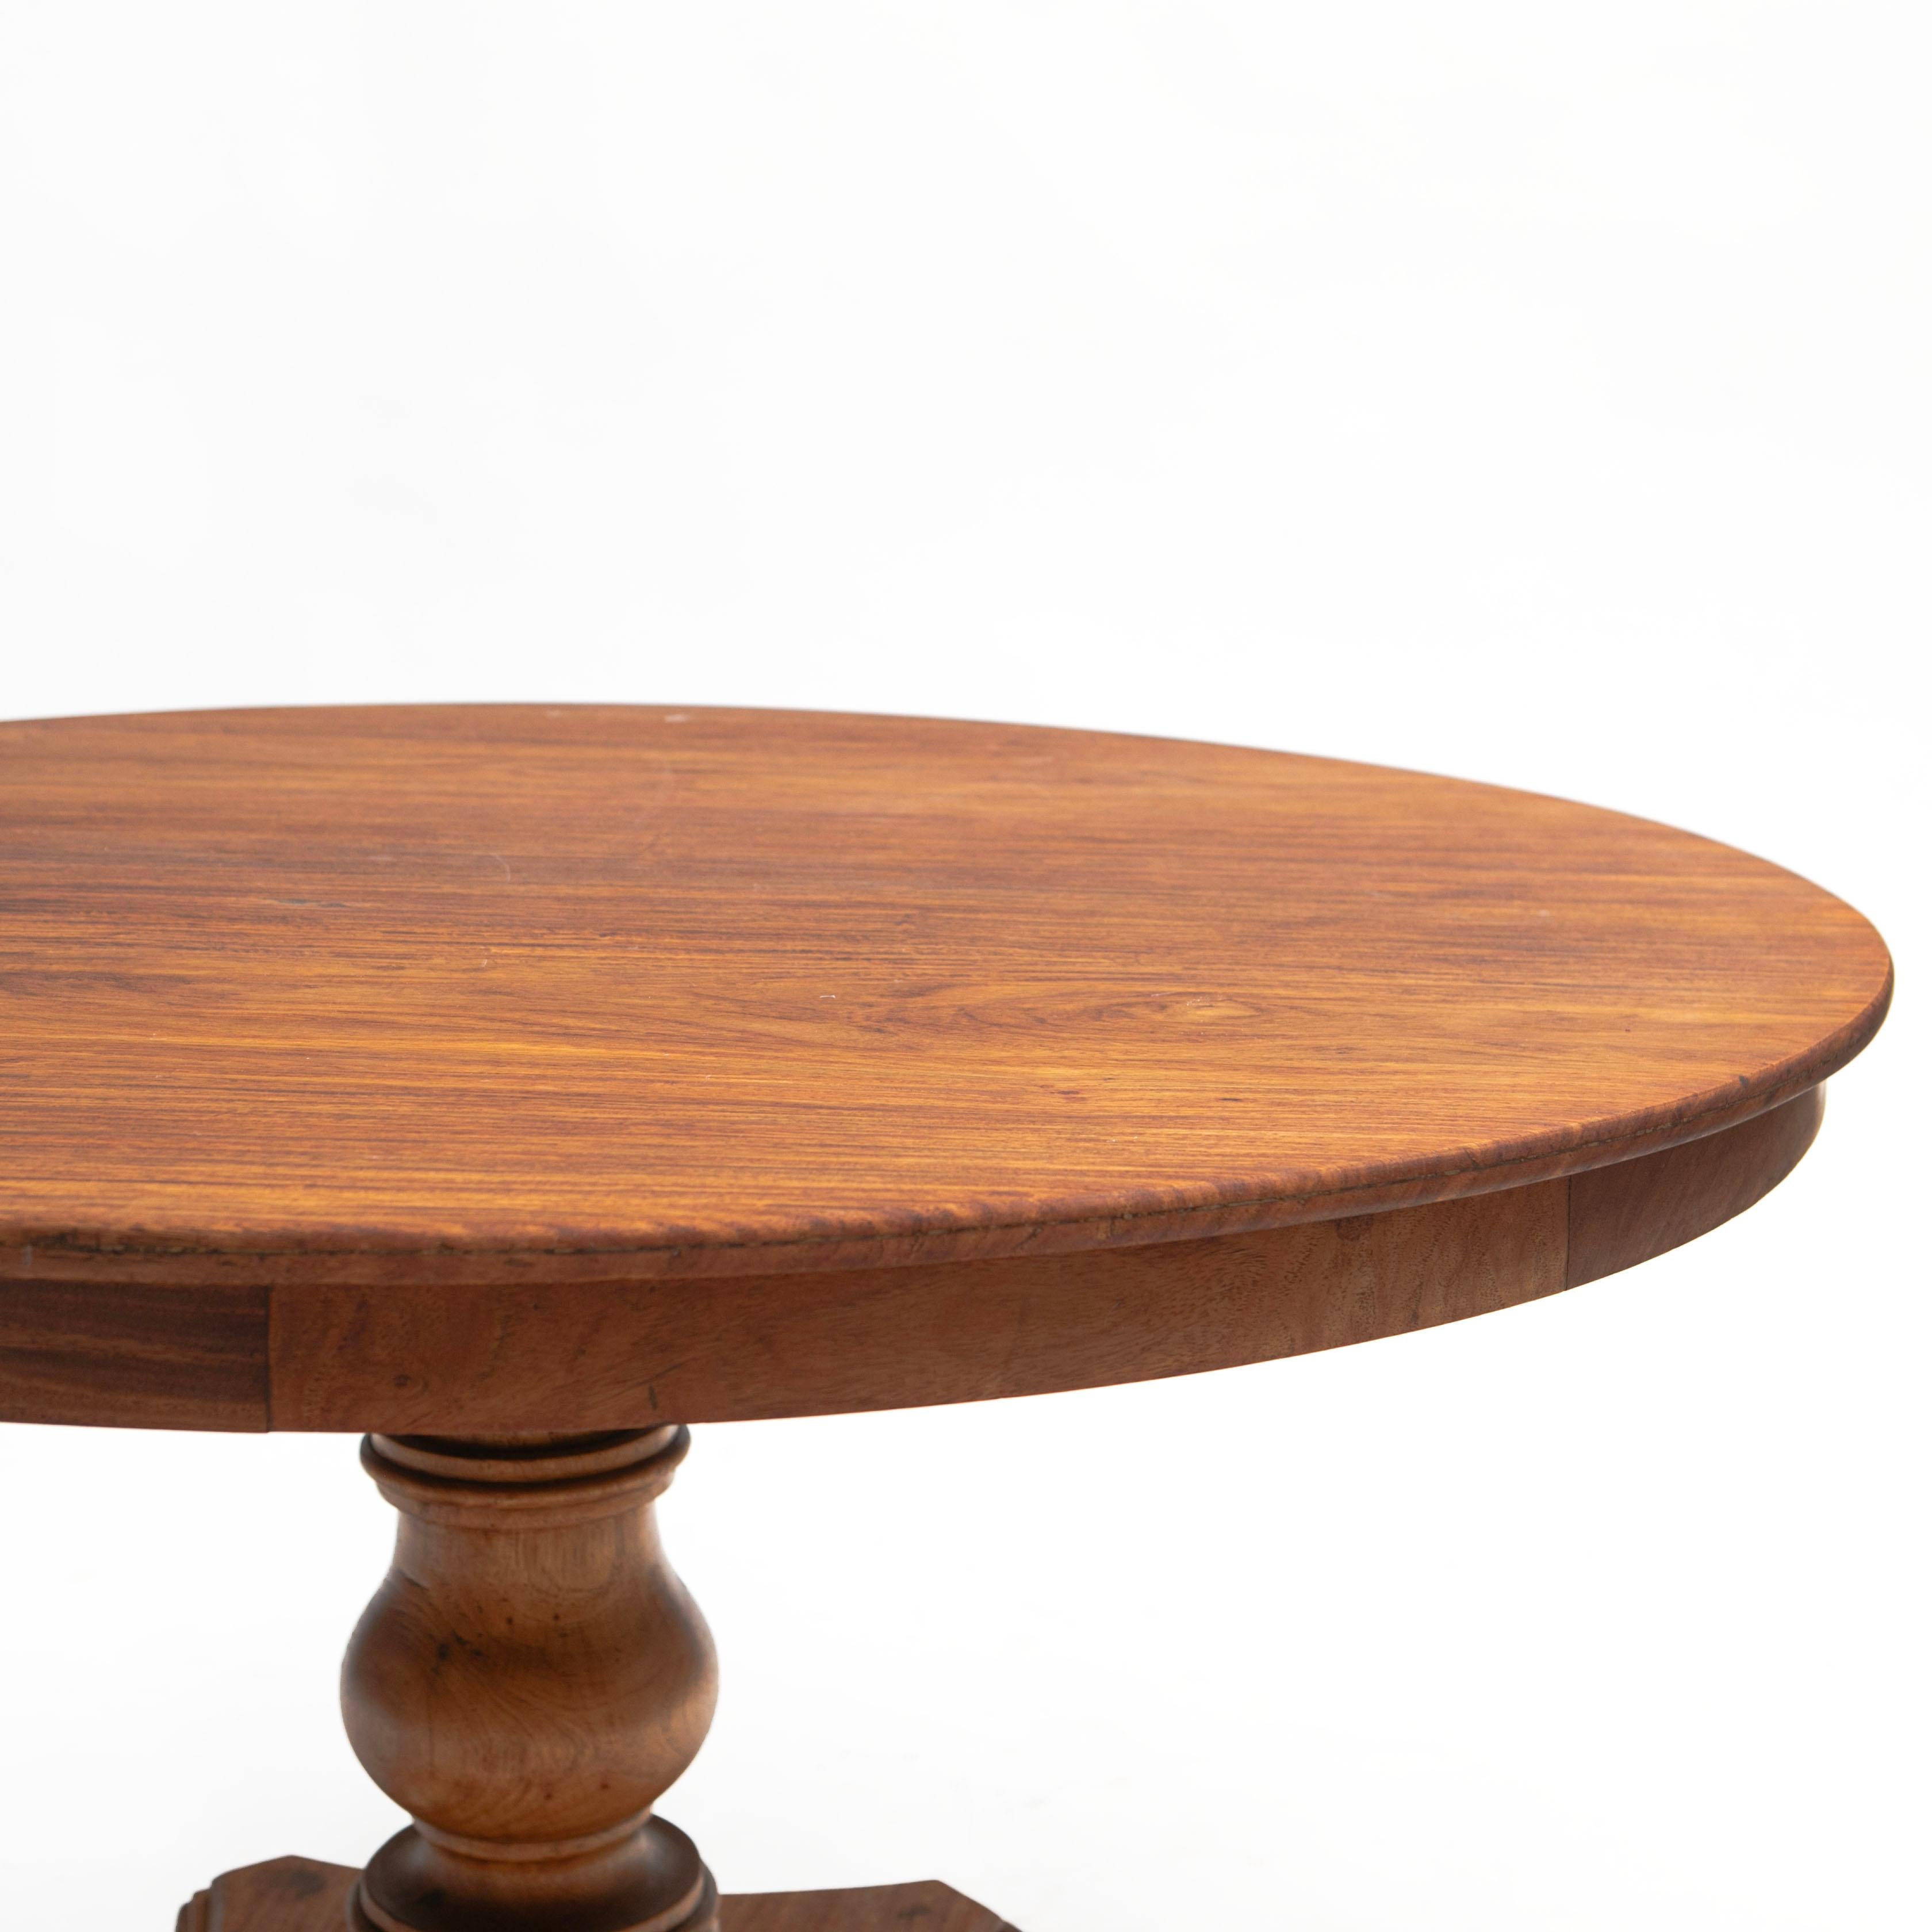 Philippine Art Deco, Round Dinning Table in Narra Wood